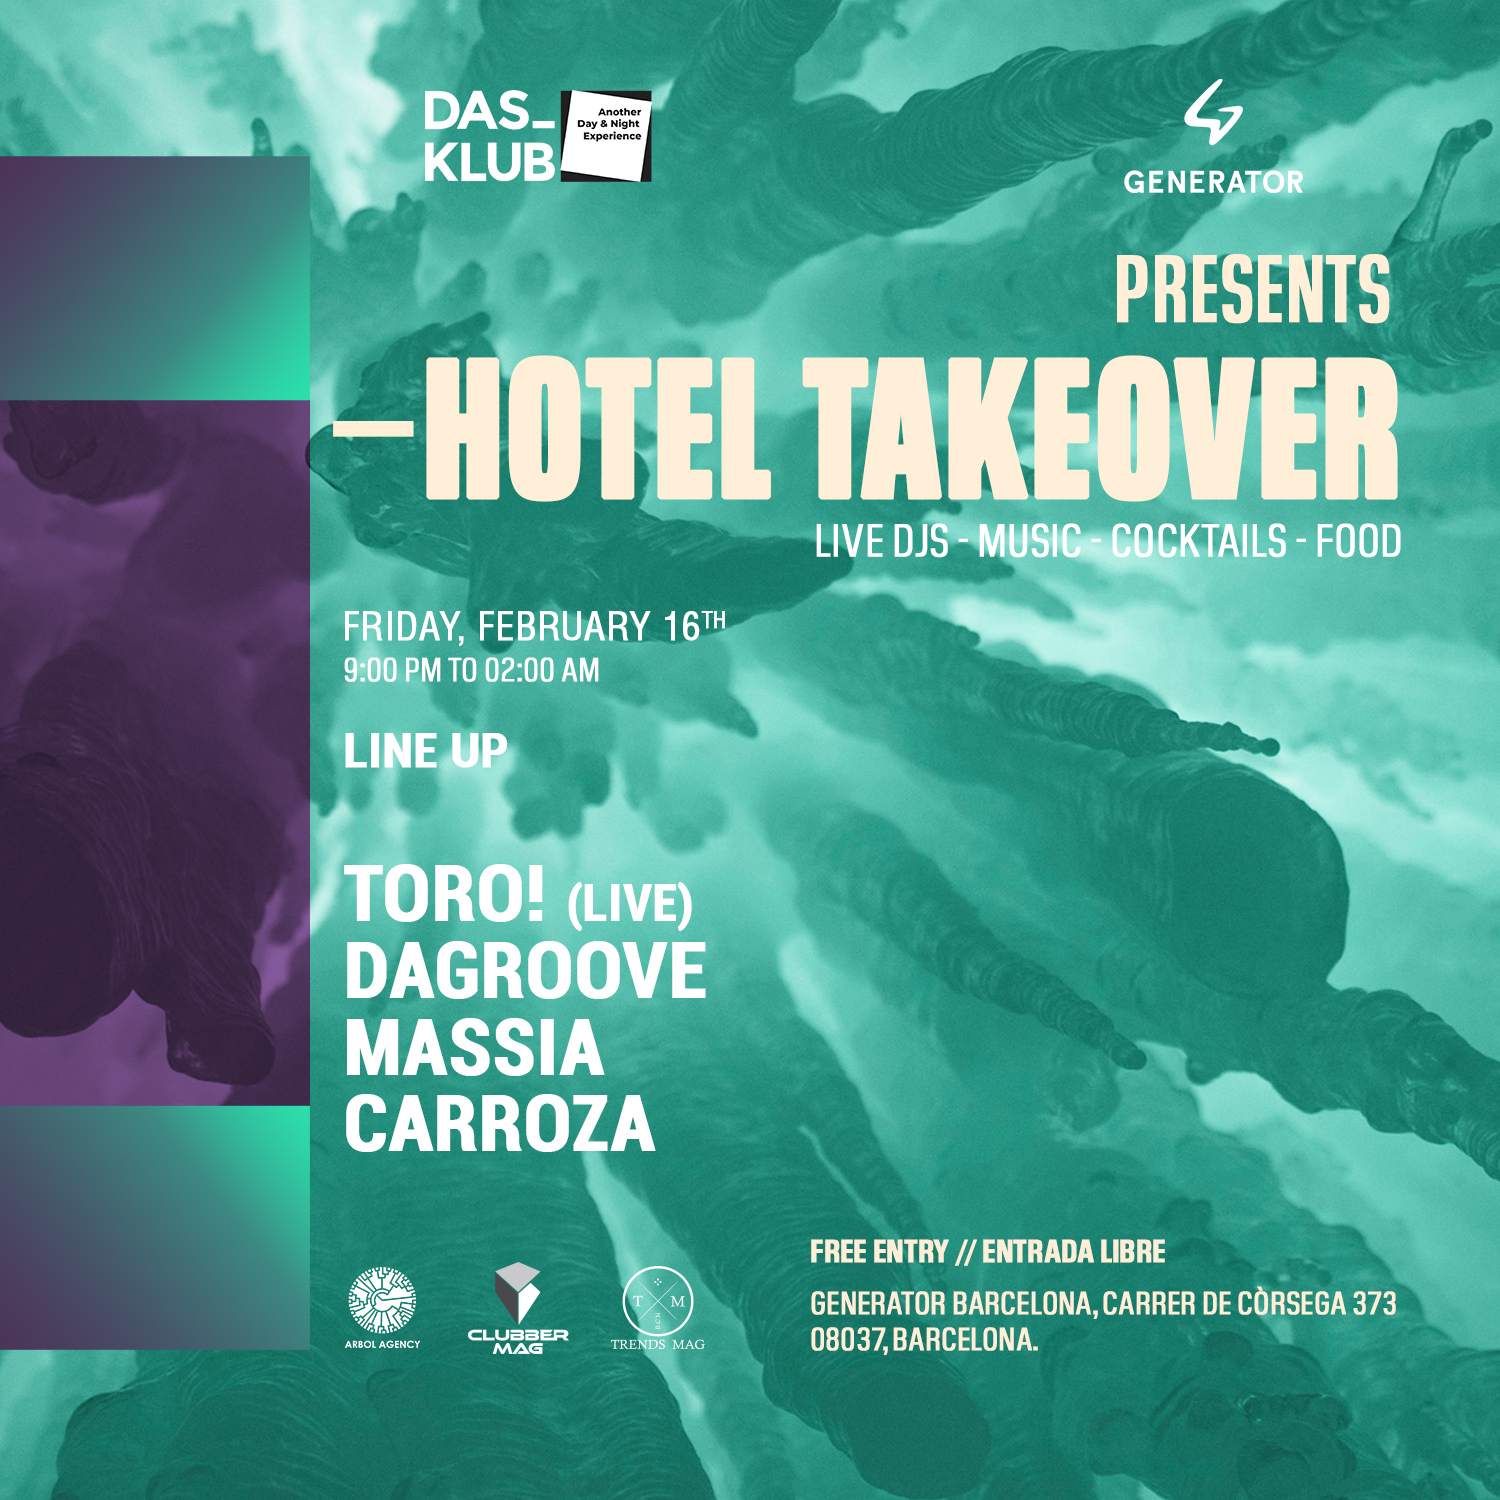 DAS-KLUB Pres HOTEL TAKEOVER PARTY (9PM - 02AM) BEST PRE PARTY IN TOWN - Página trasera